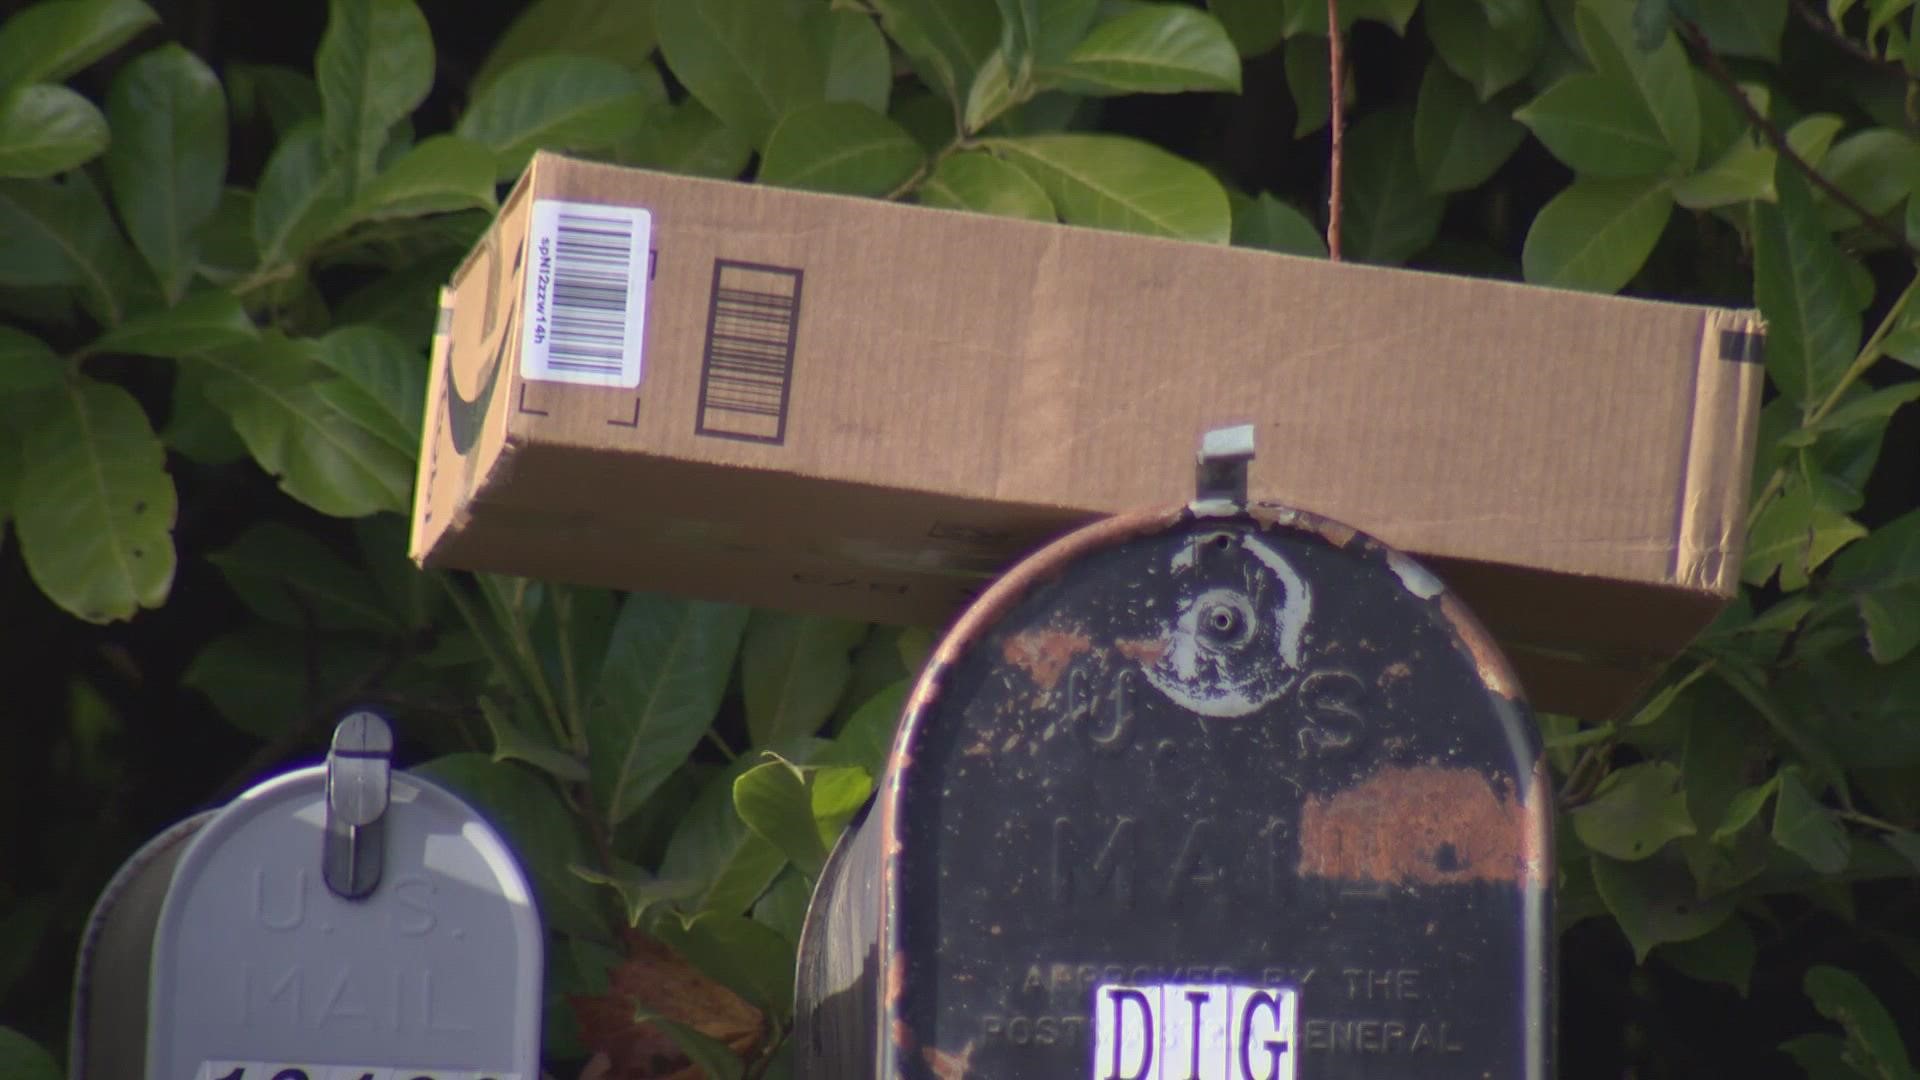 On Vashon Island, some residents say they are dealing with a mail delivery crisis. They say that staffing shortages are having a damaging domino effect.